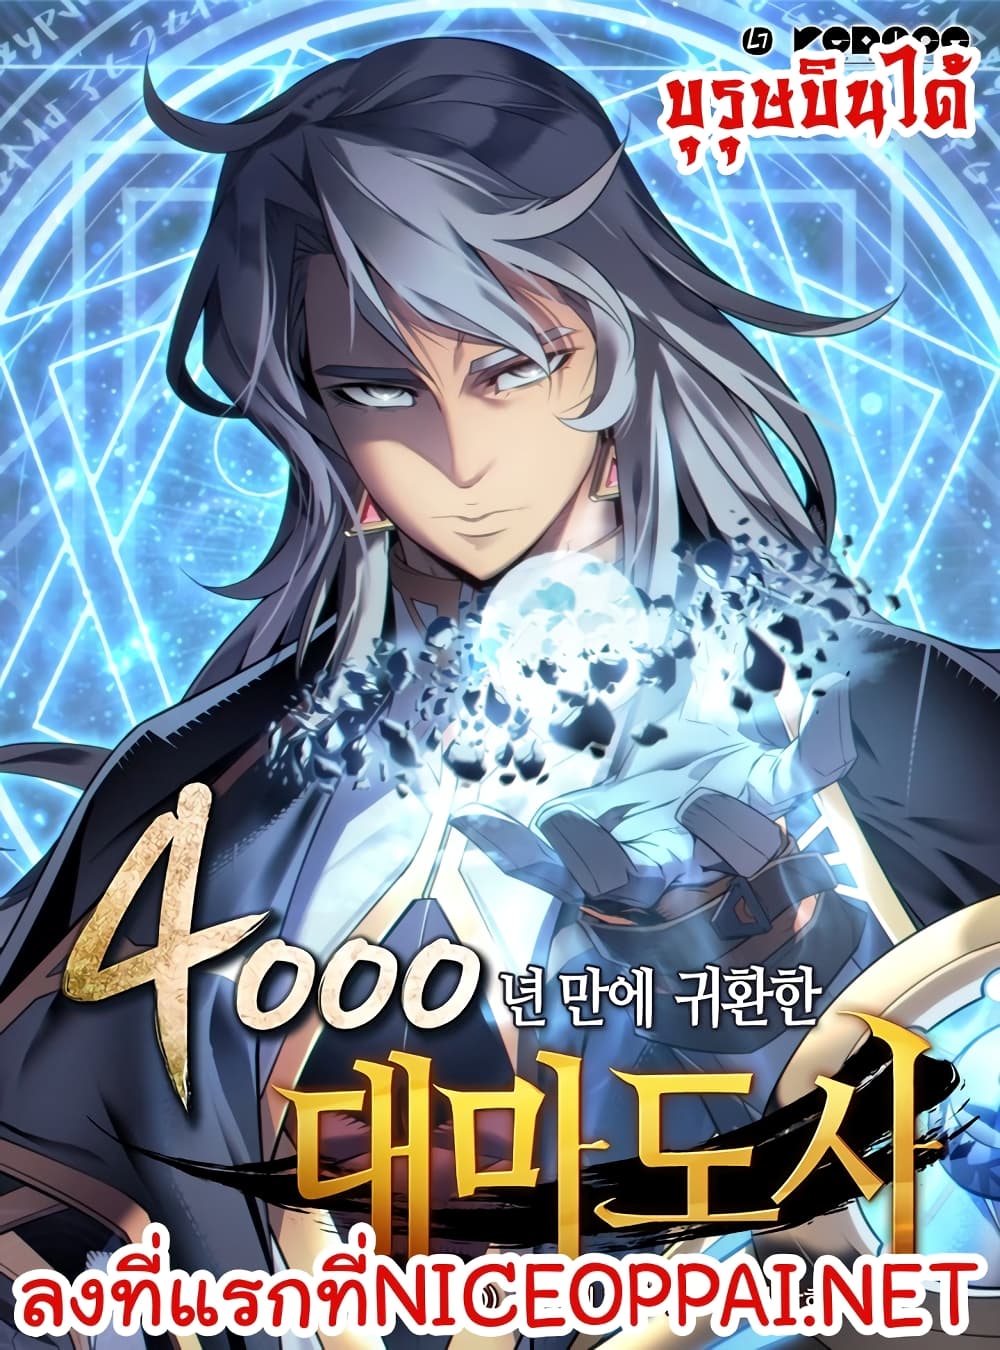 The Great Mage Returns After 4000 Years 42 (1)